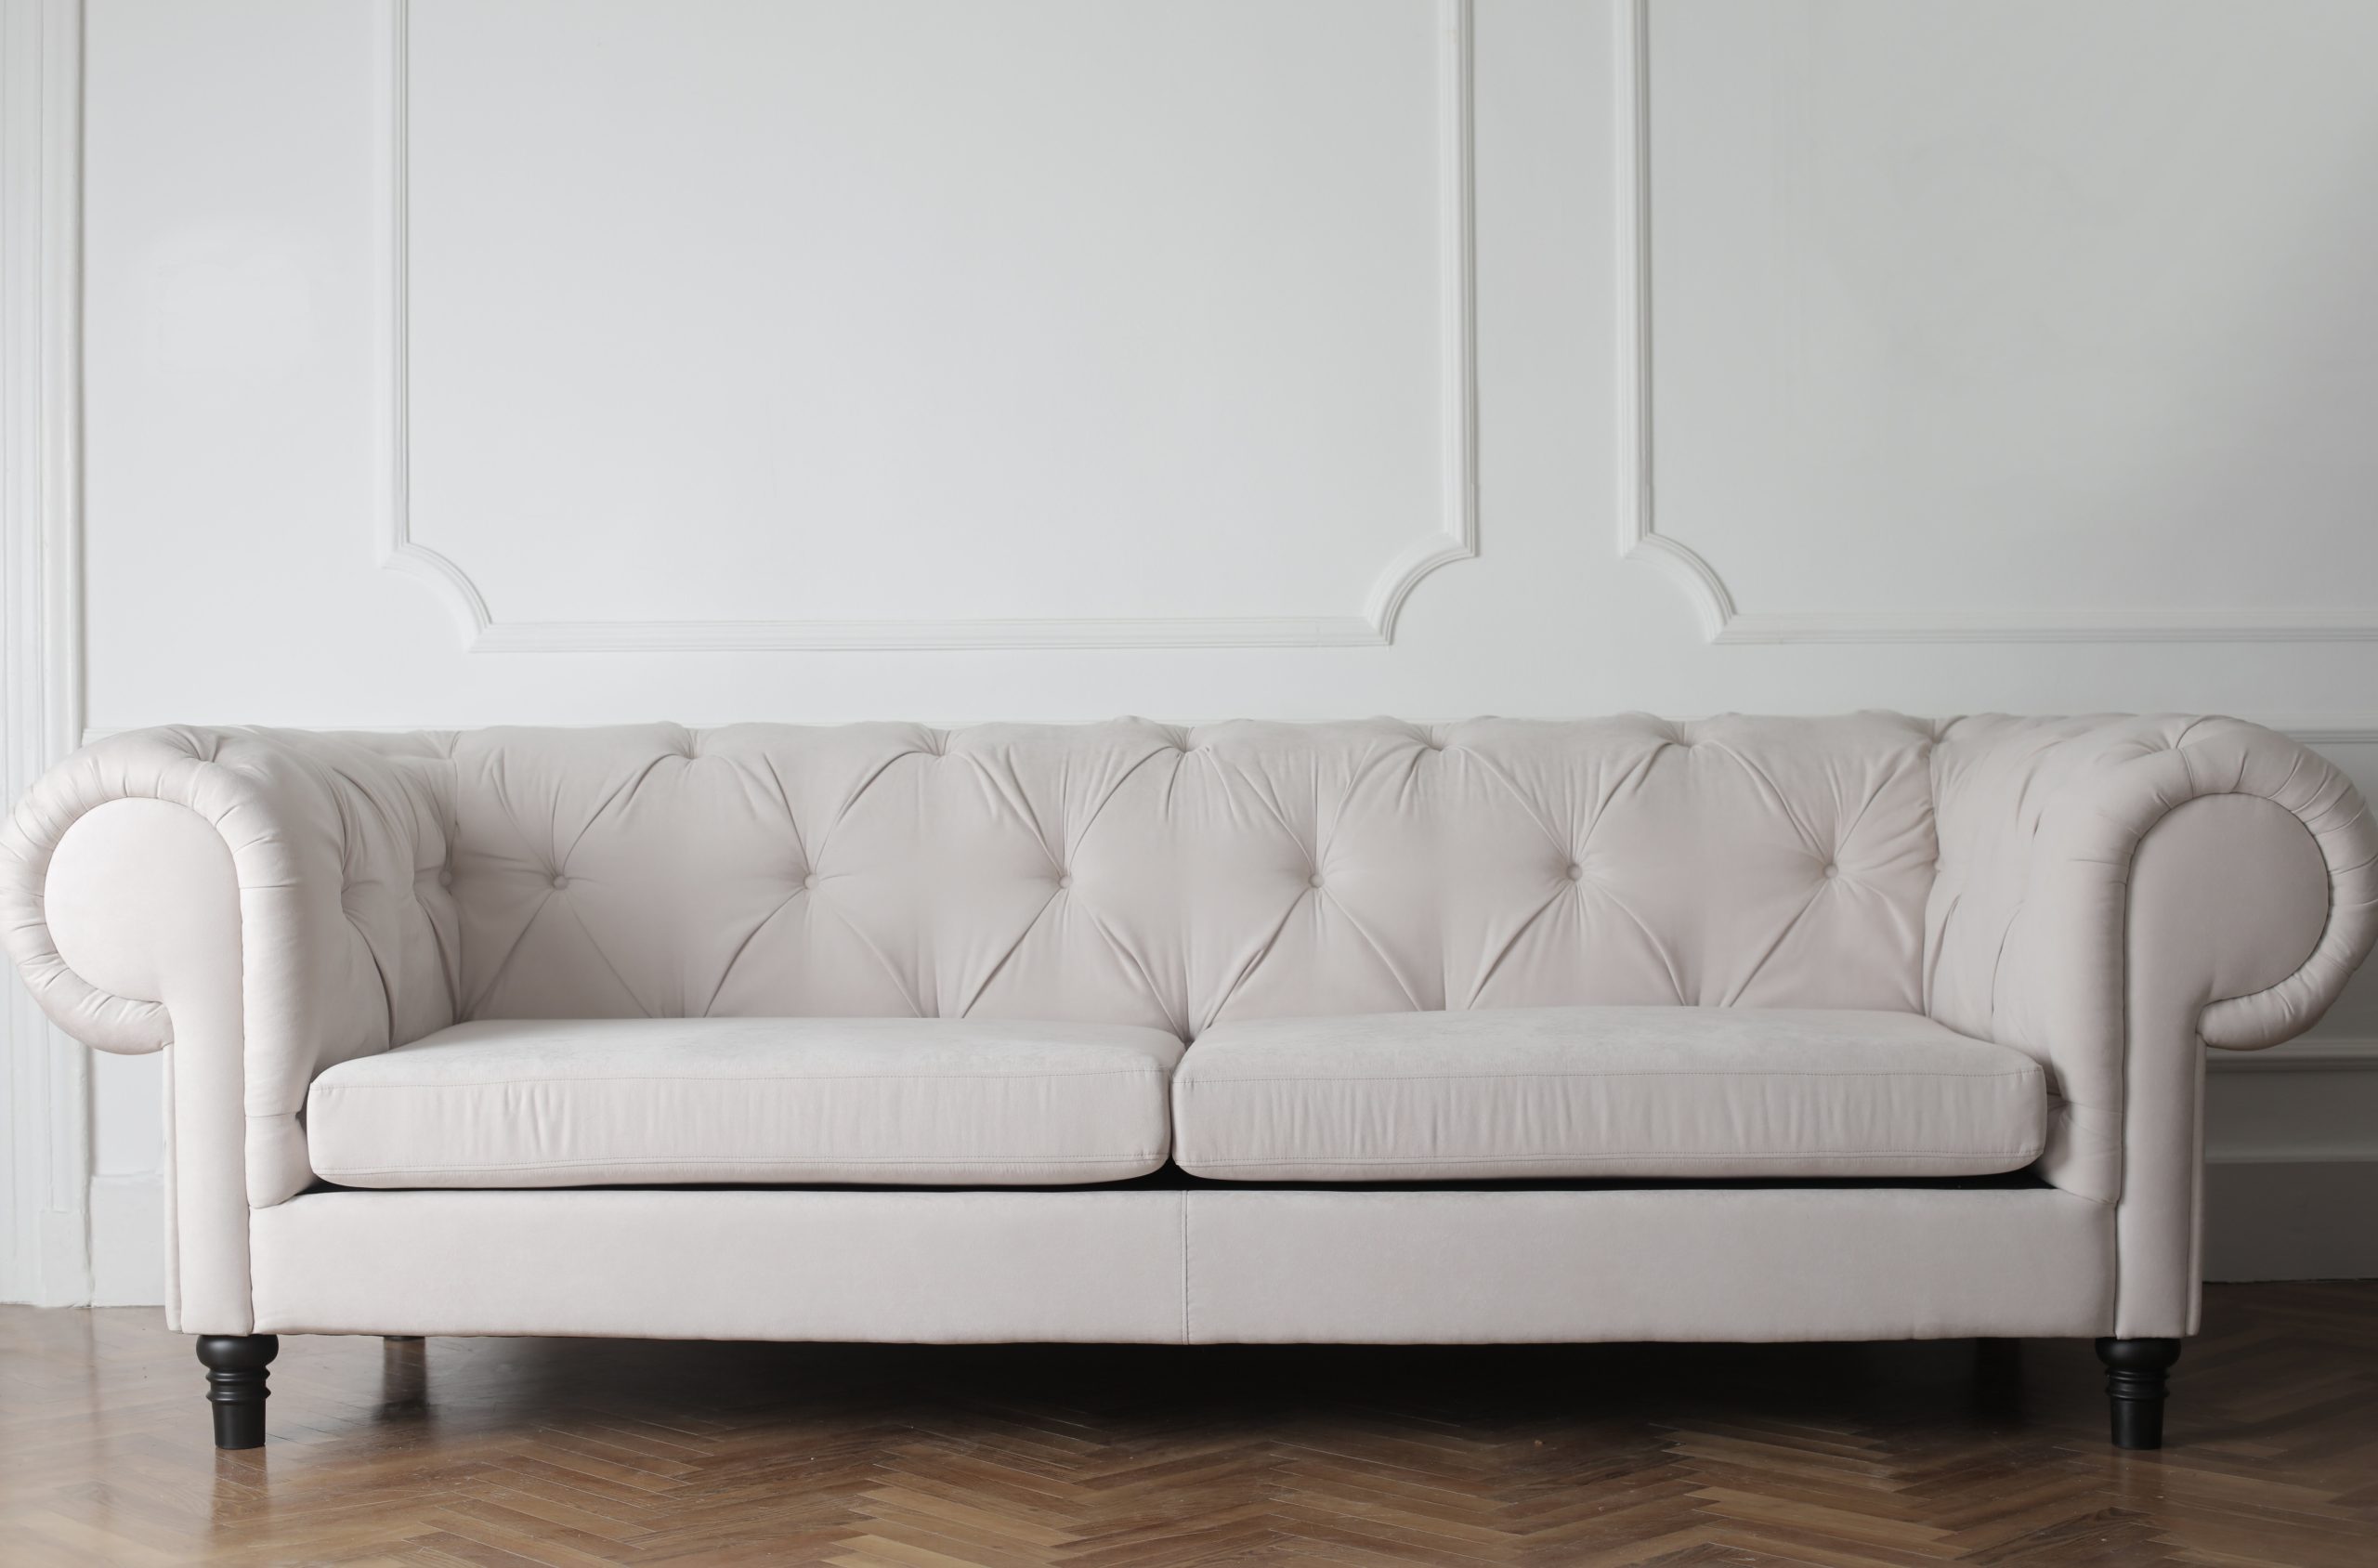 A grey color sofa placed in the living room.